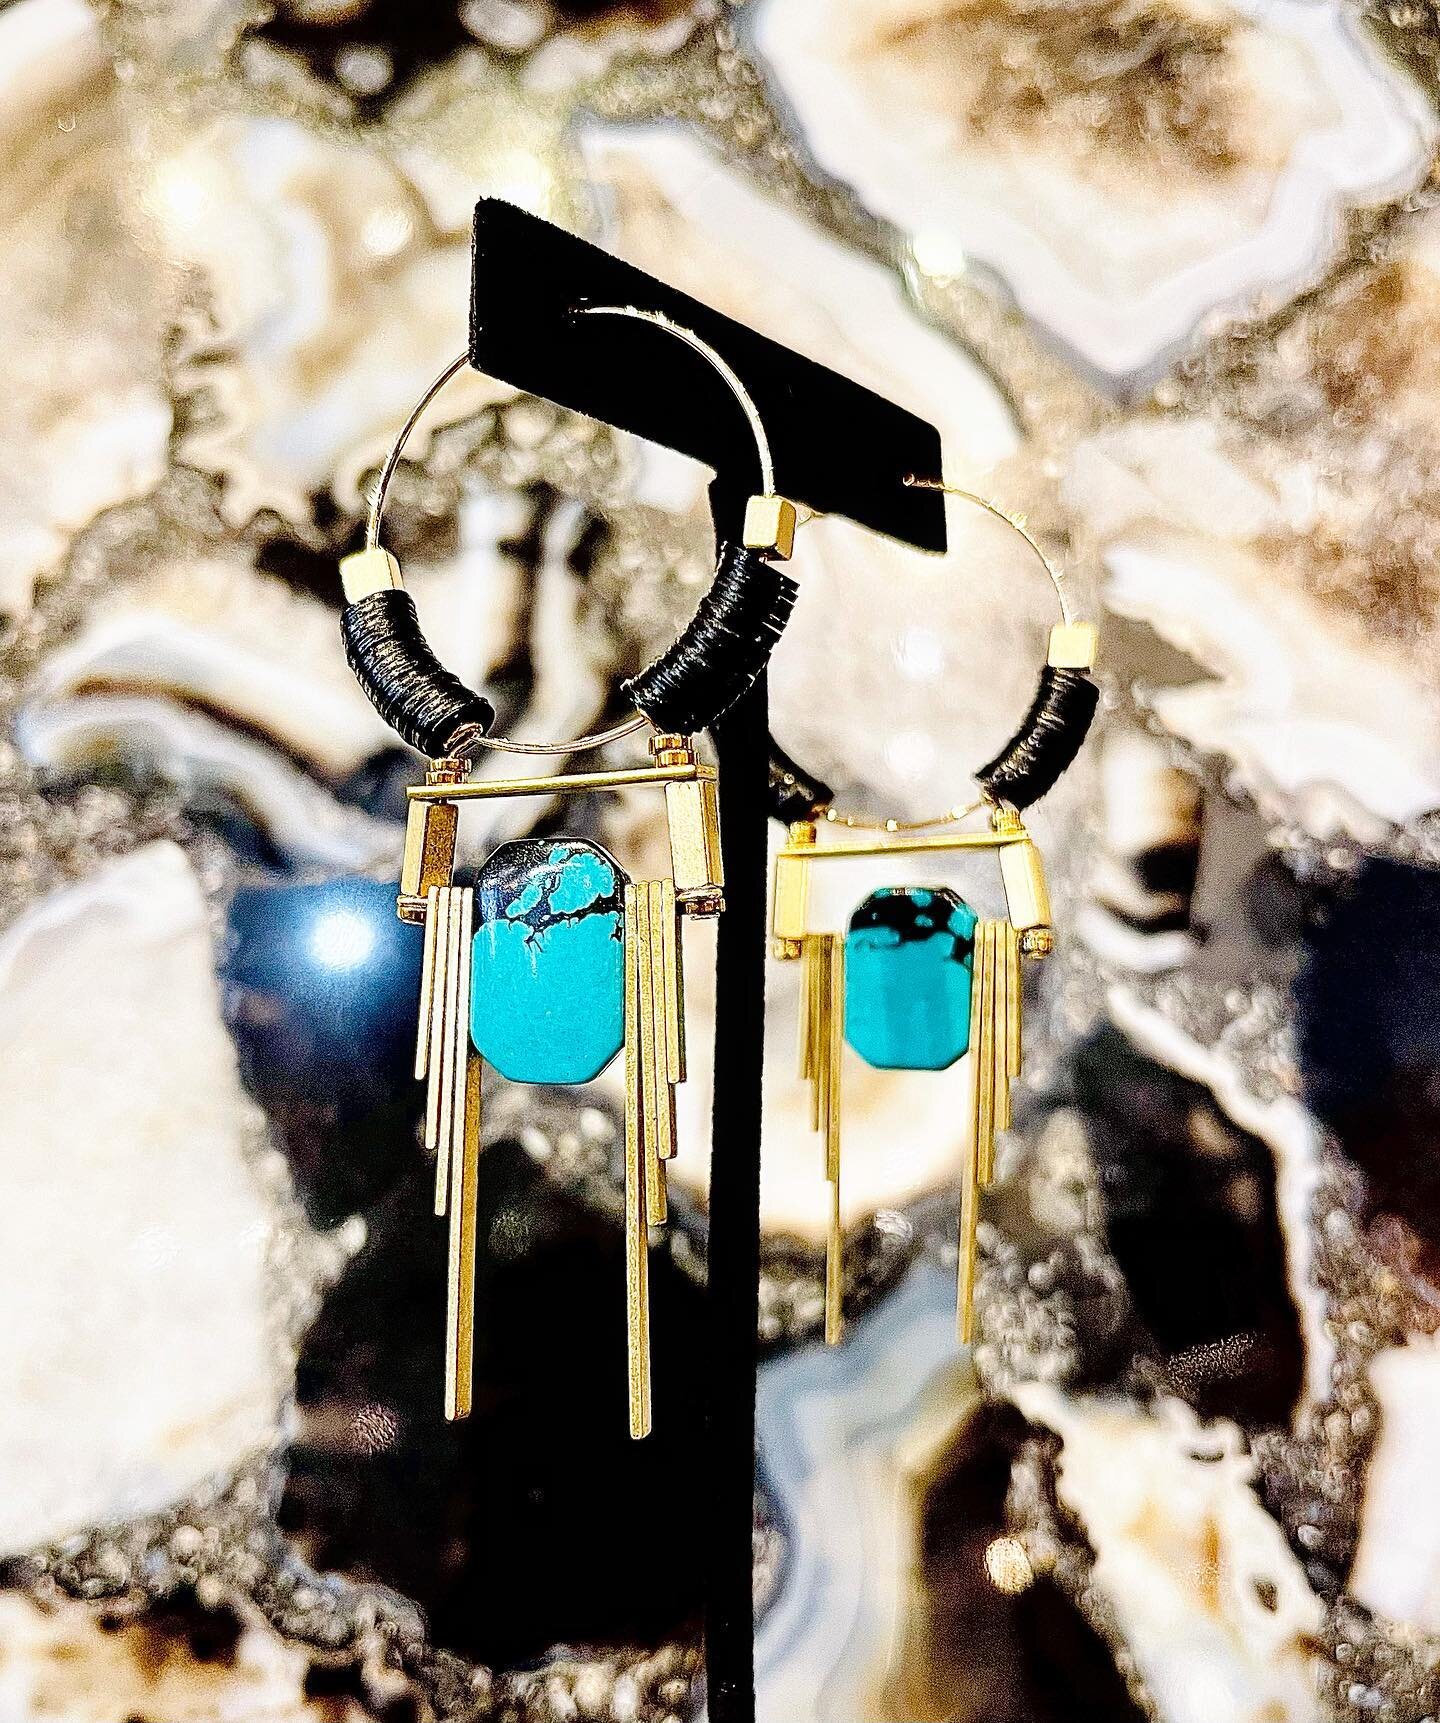 You have my attention. New arrivals. New Show stopping jewelry #johnnieq #statement earrings #turquoise #rockstar #stylist #franklintn #boutiqueshopping #americasfavoritemainstreet